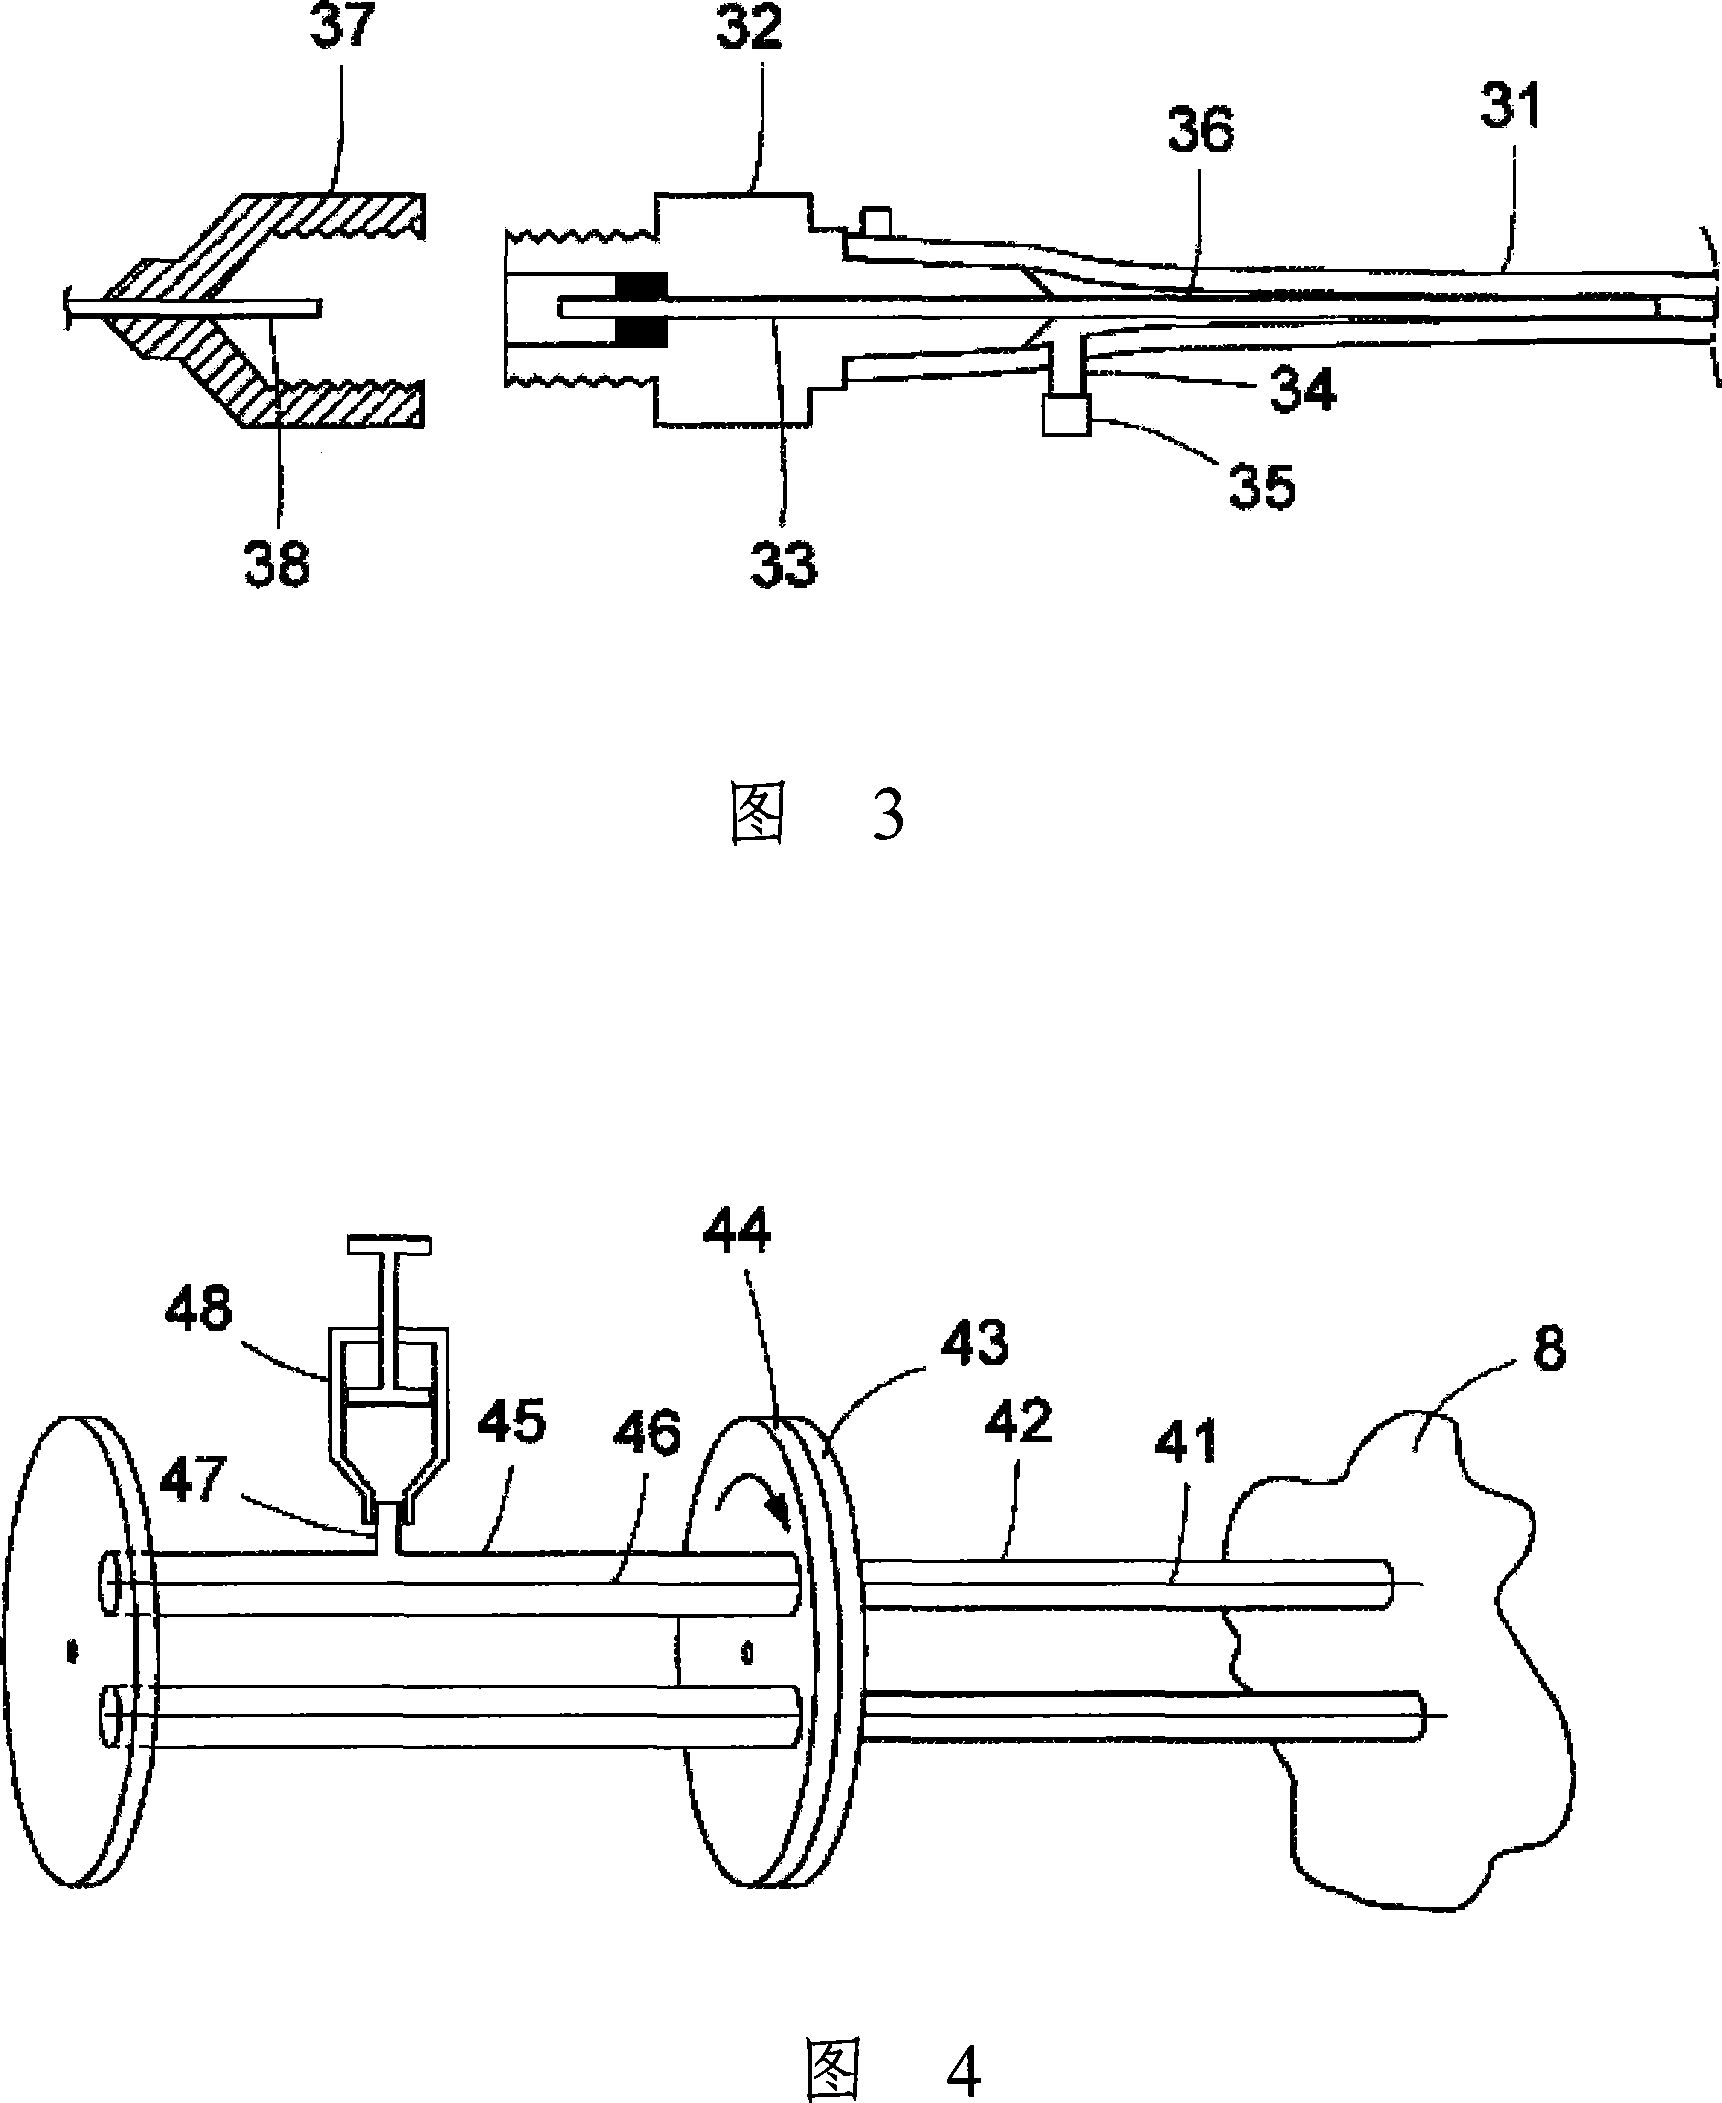 Light coupling adapter device for photodynamic or photothermal therapy or photodynamic diagnosis, corresponding system and method